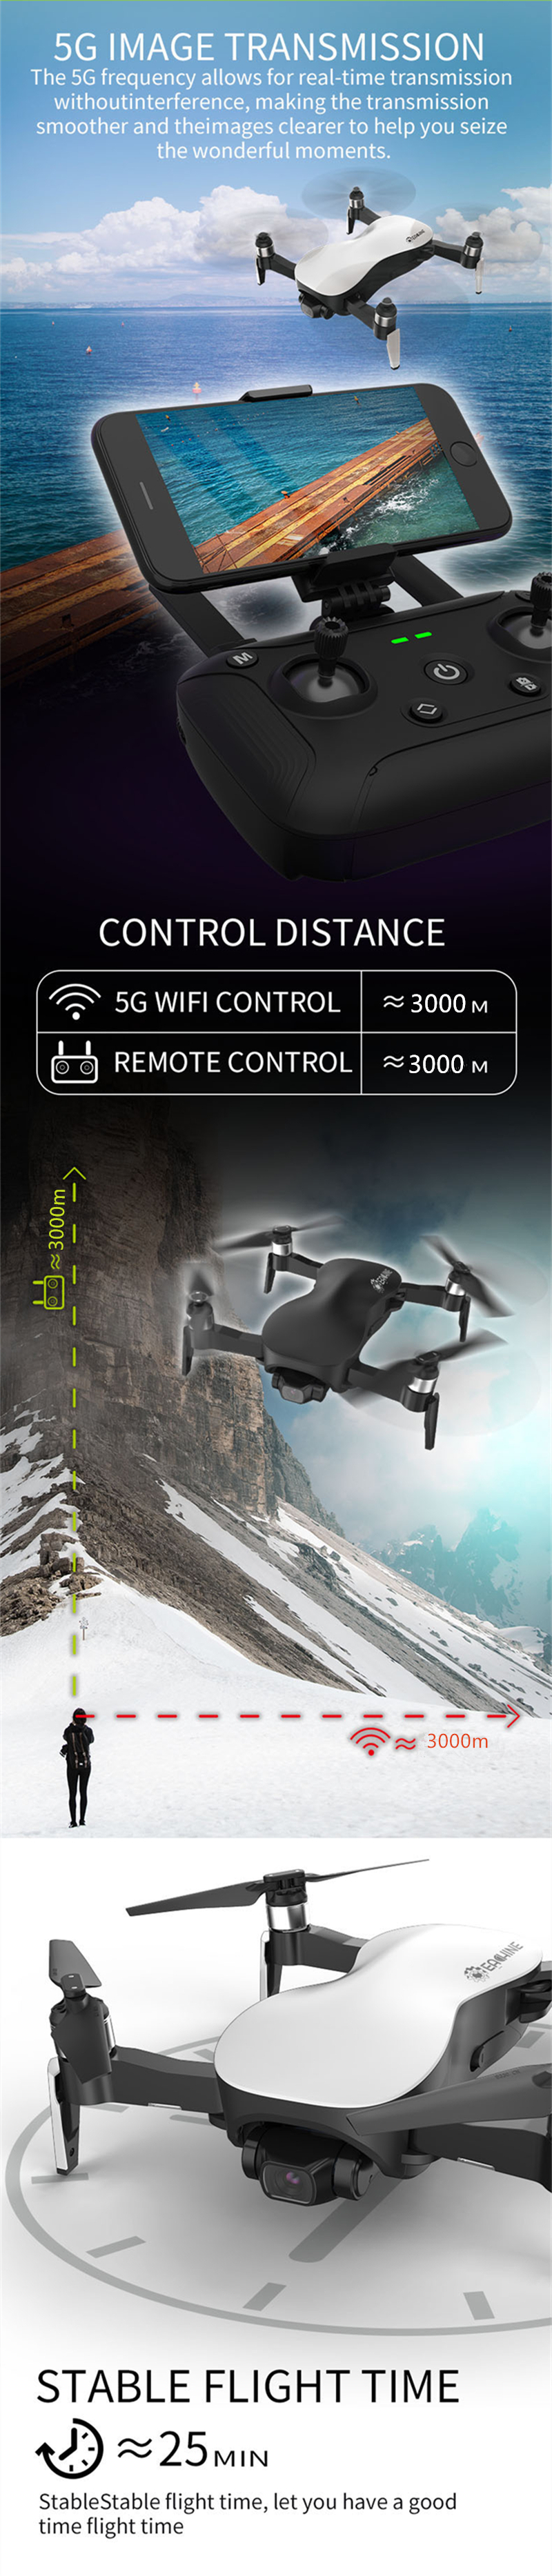 Eachine-EX4-PRO-5G-WIFI-3KM-FPV-GPS-With-4K-HD-Camera-3-Axis-Stable-Gimbal-25-Mins-Flight-Time-RC-Dr-1589424-3